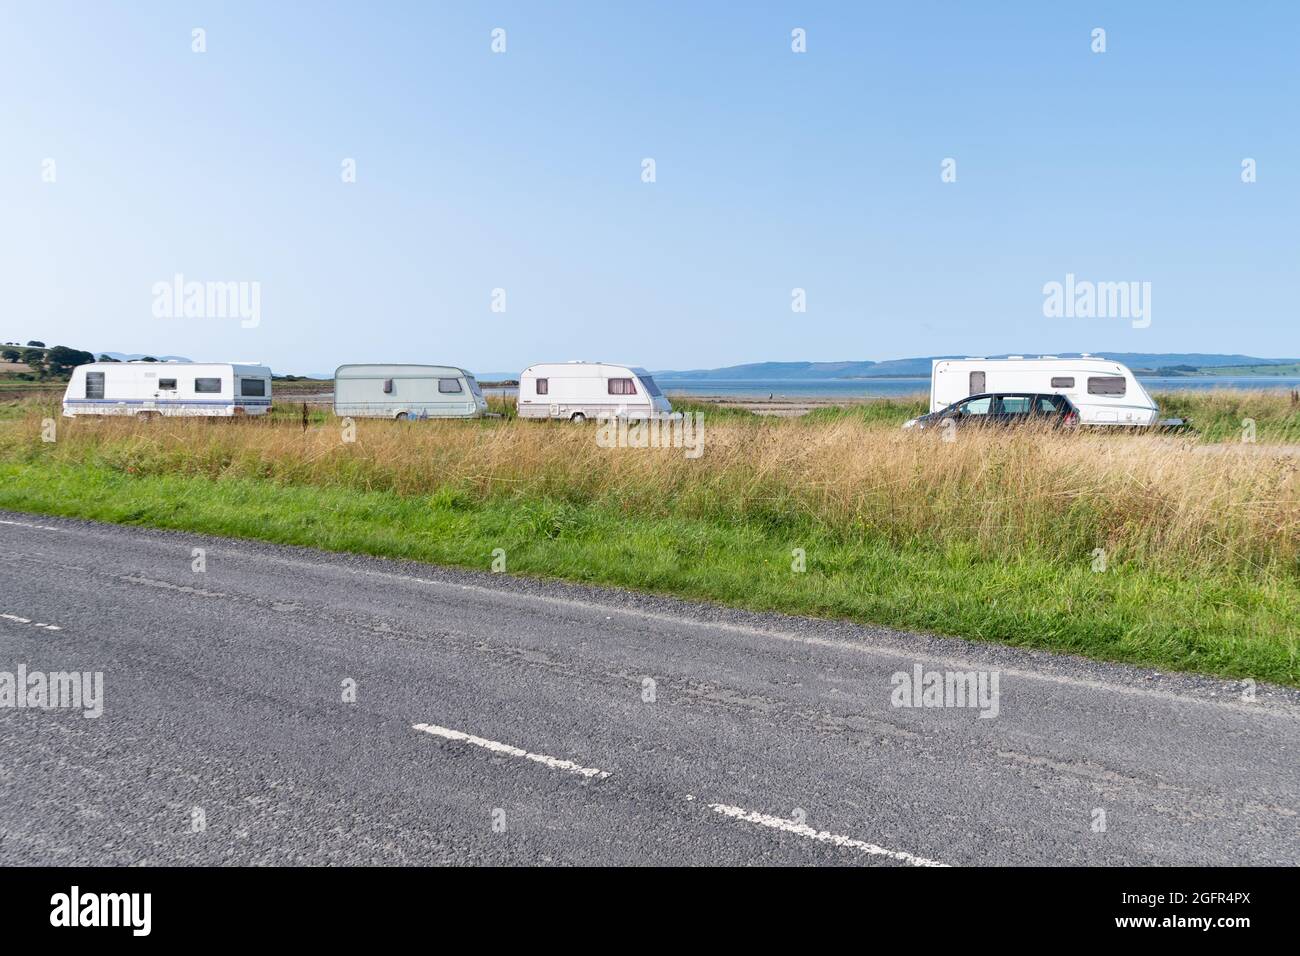 Mobile caravans parked at Ettrick Bay South, Isle of Bute, Scotland, UK Stock Photo